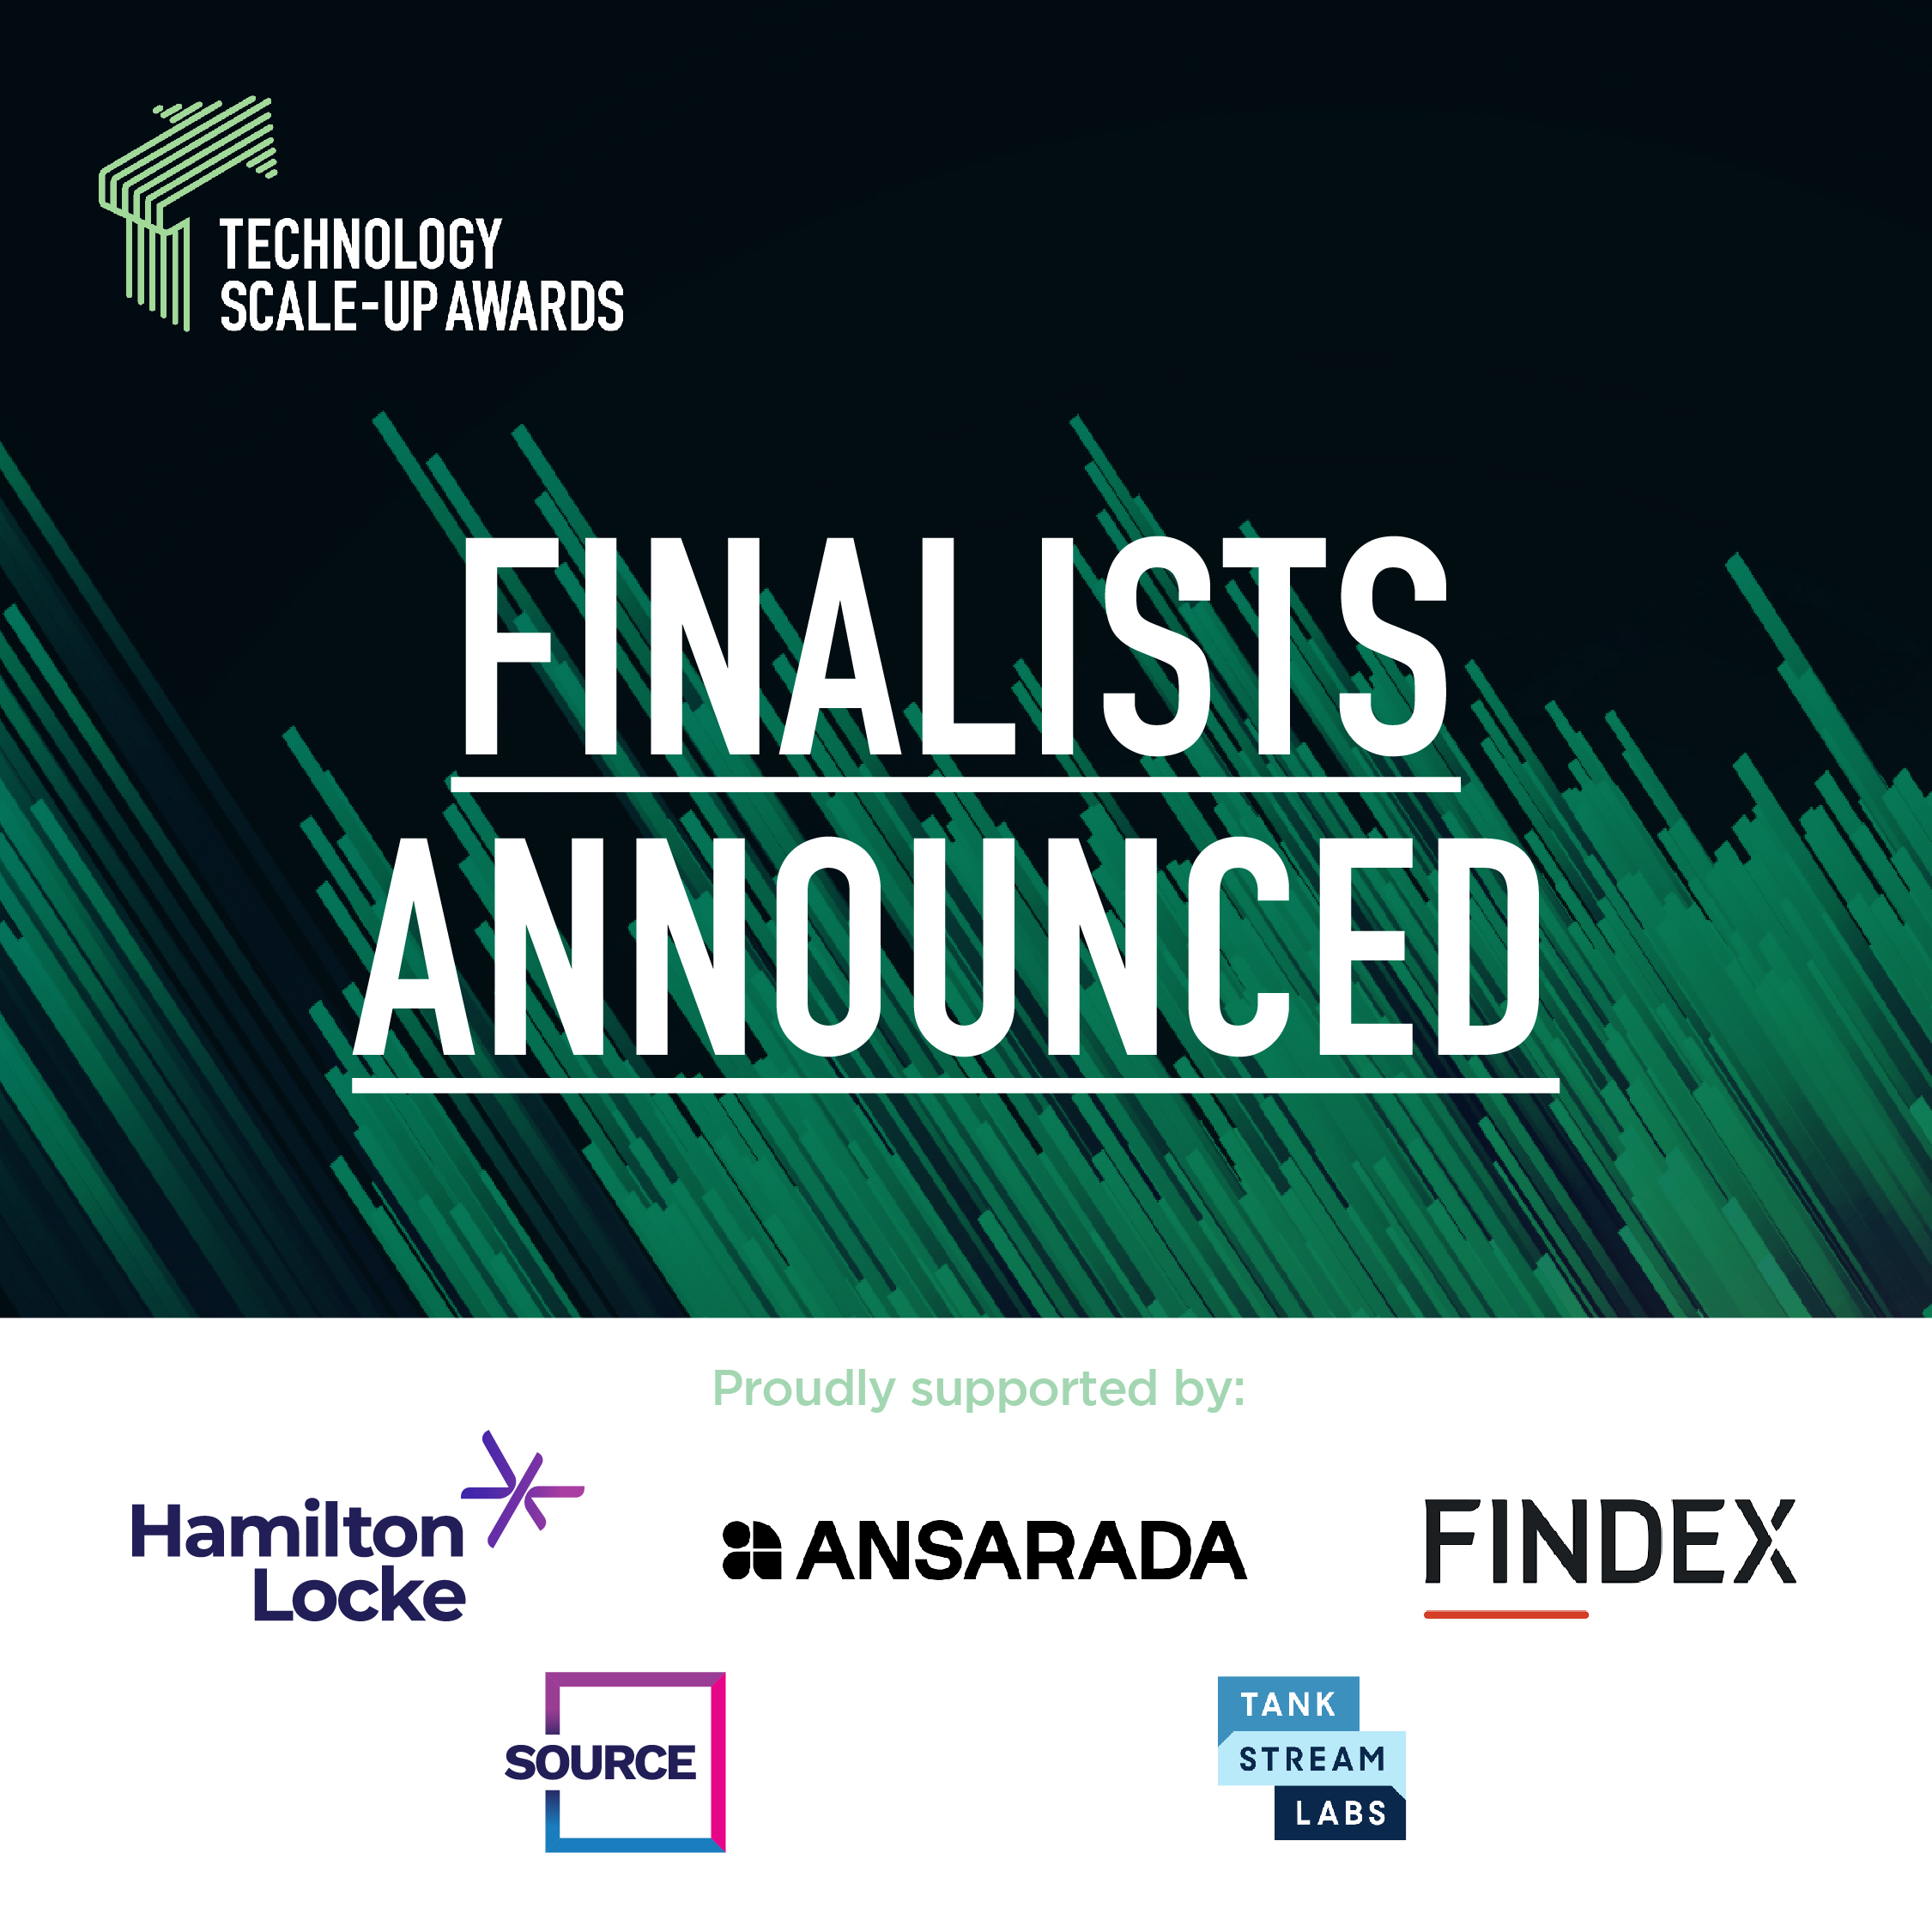 Finalists announced